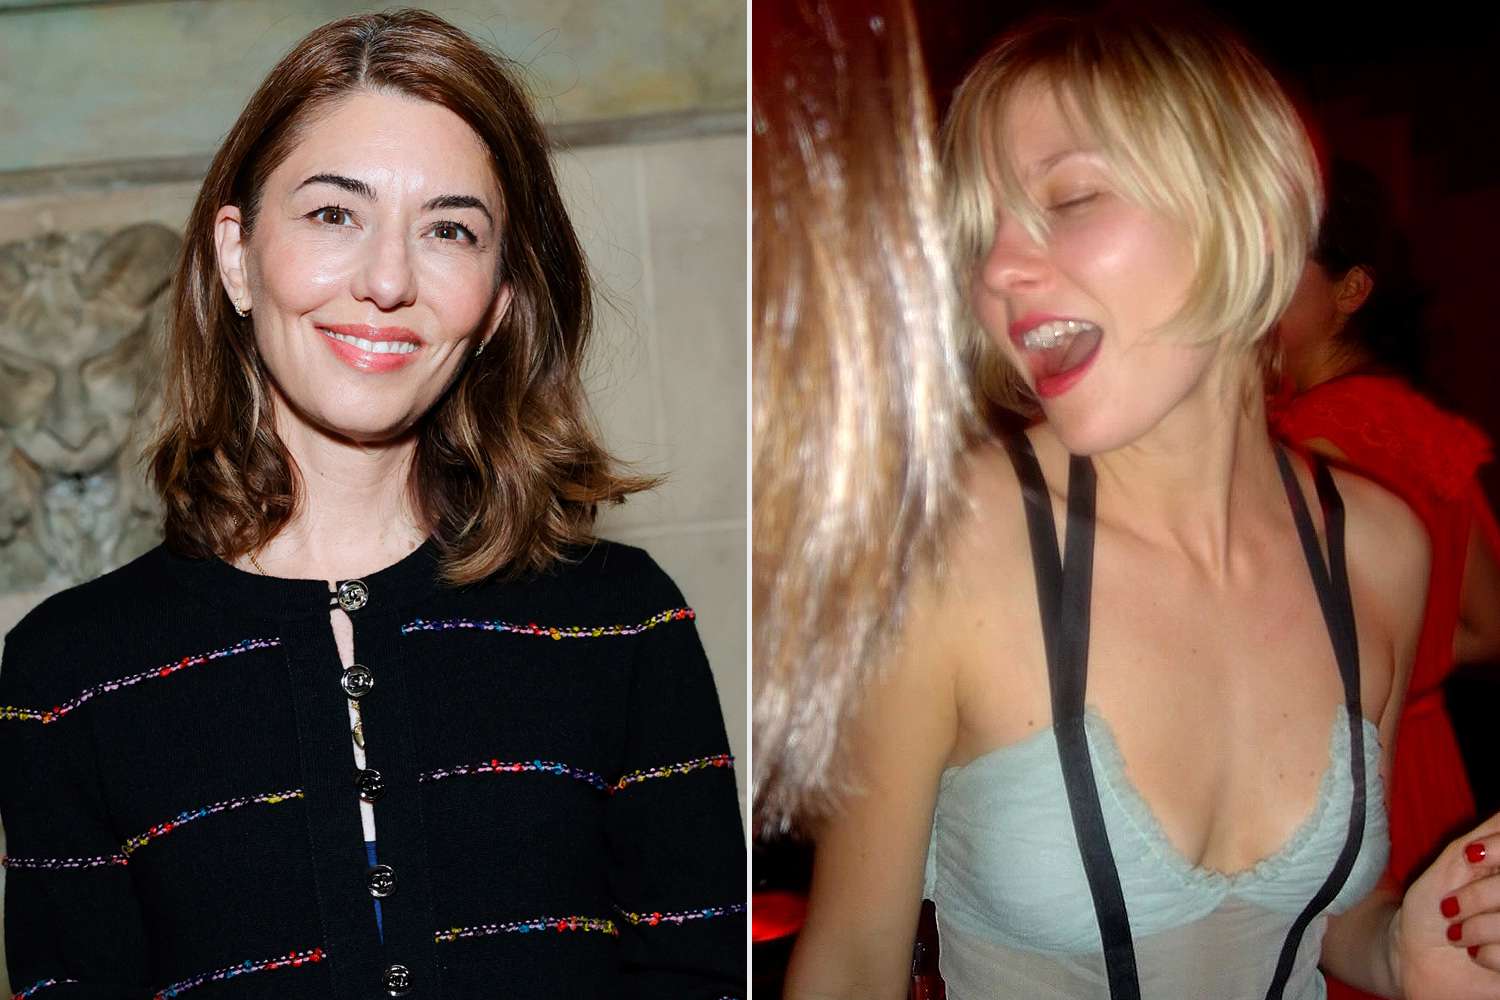 Sofia Coppola Shares Rare Photo of Kirsten Dunst to Wish Her Muse a Happy Birthday